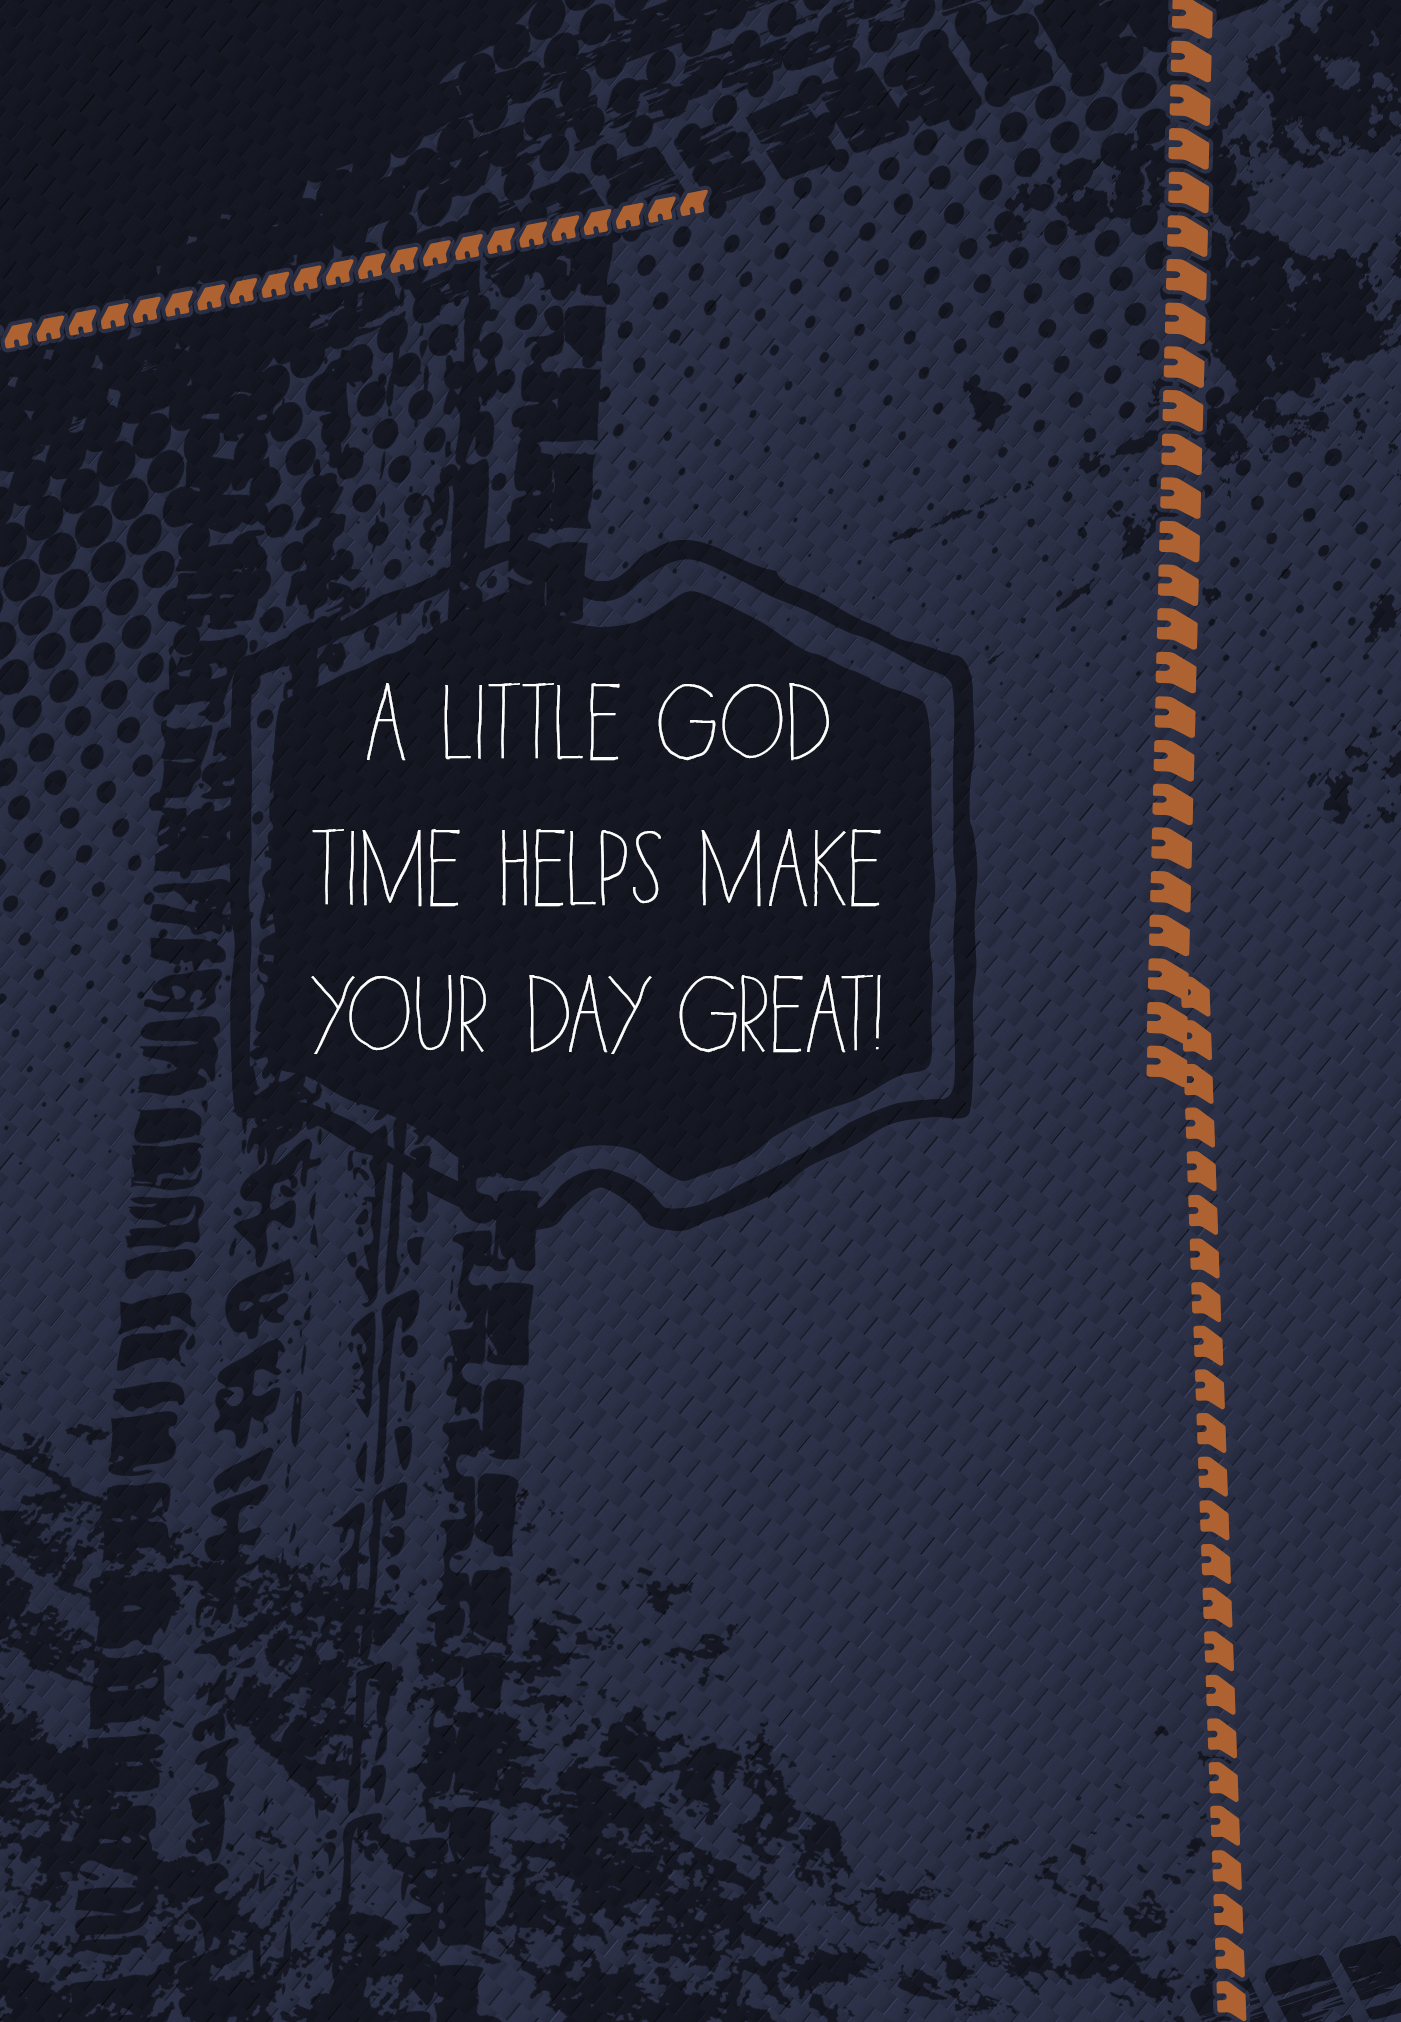 A Little God Time for Boys: 365 Daily Devotions - faux leather gift  edition: 9781424563869 